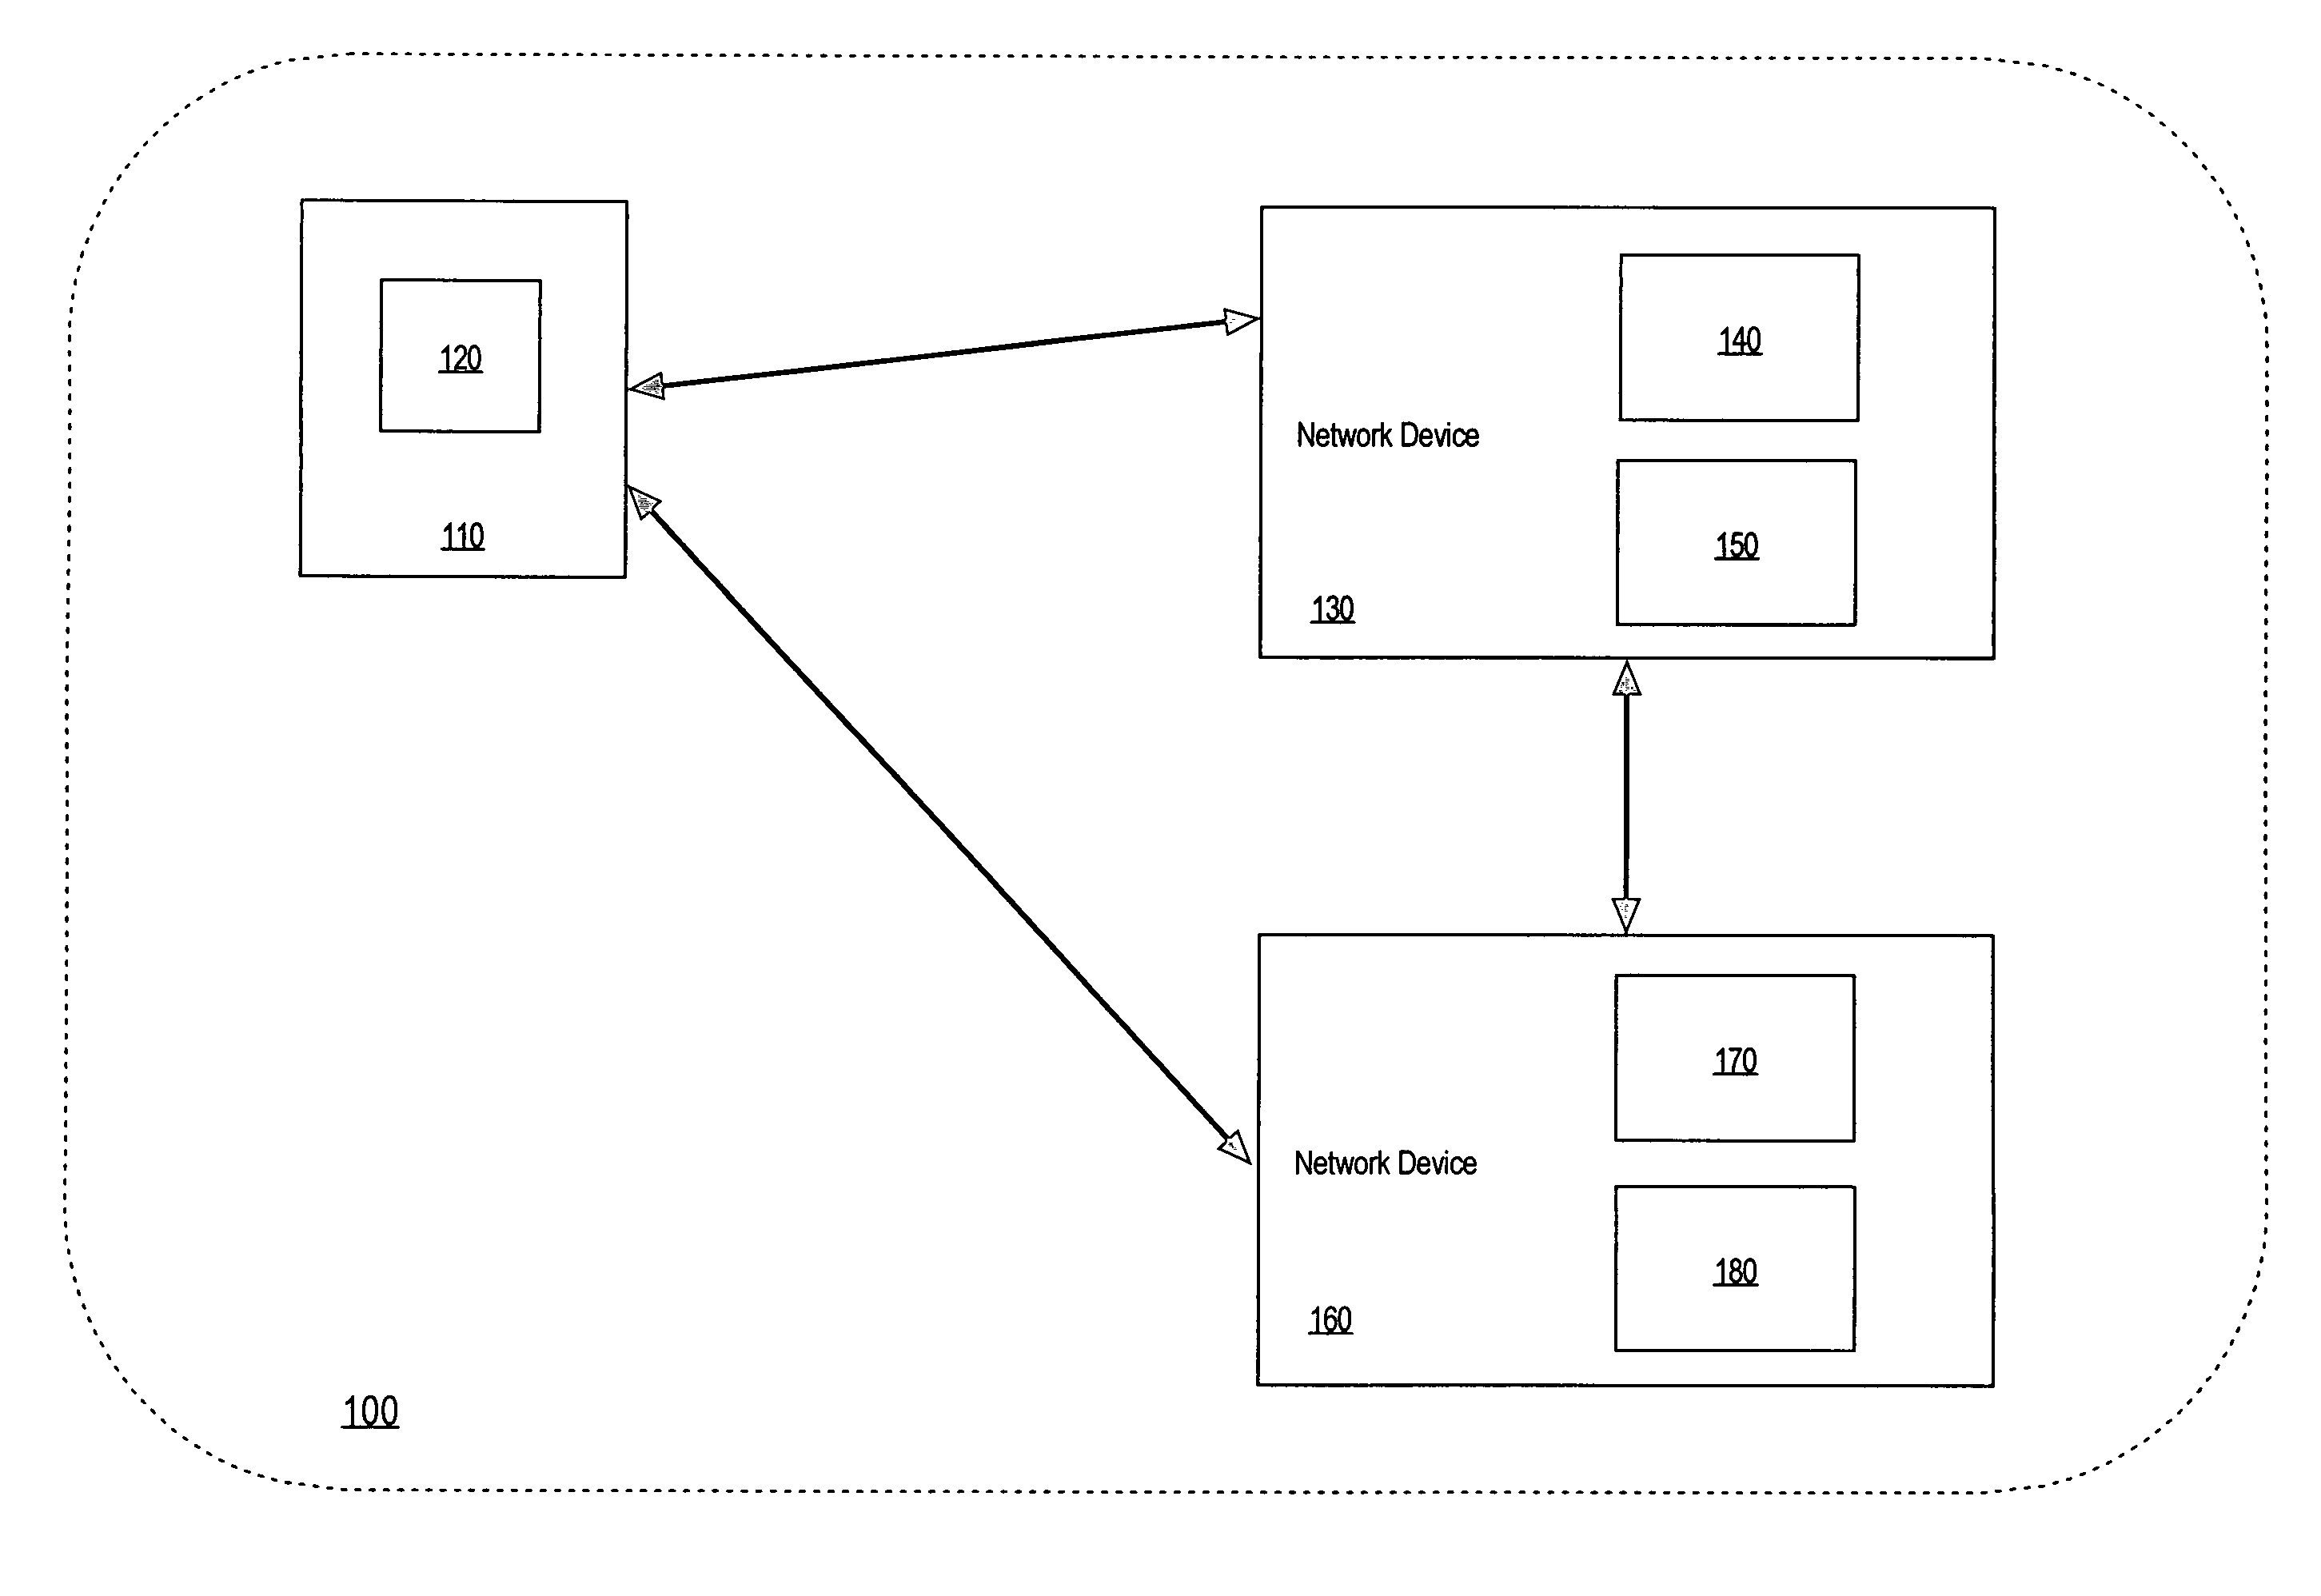 Method of diagnosing and repairing network devices based on scenarios